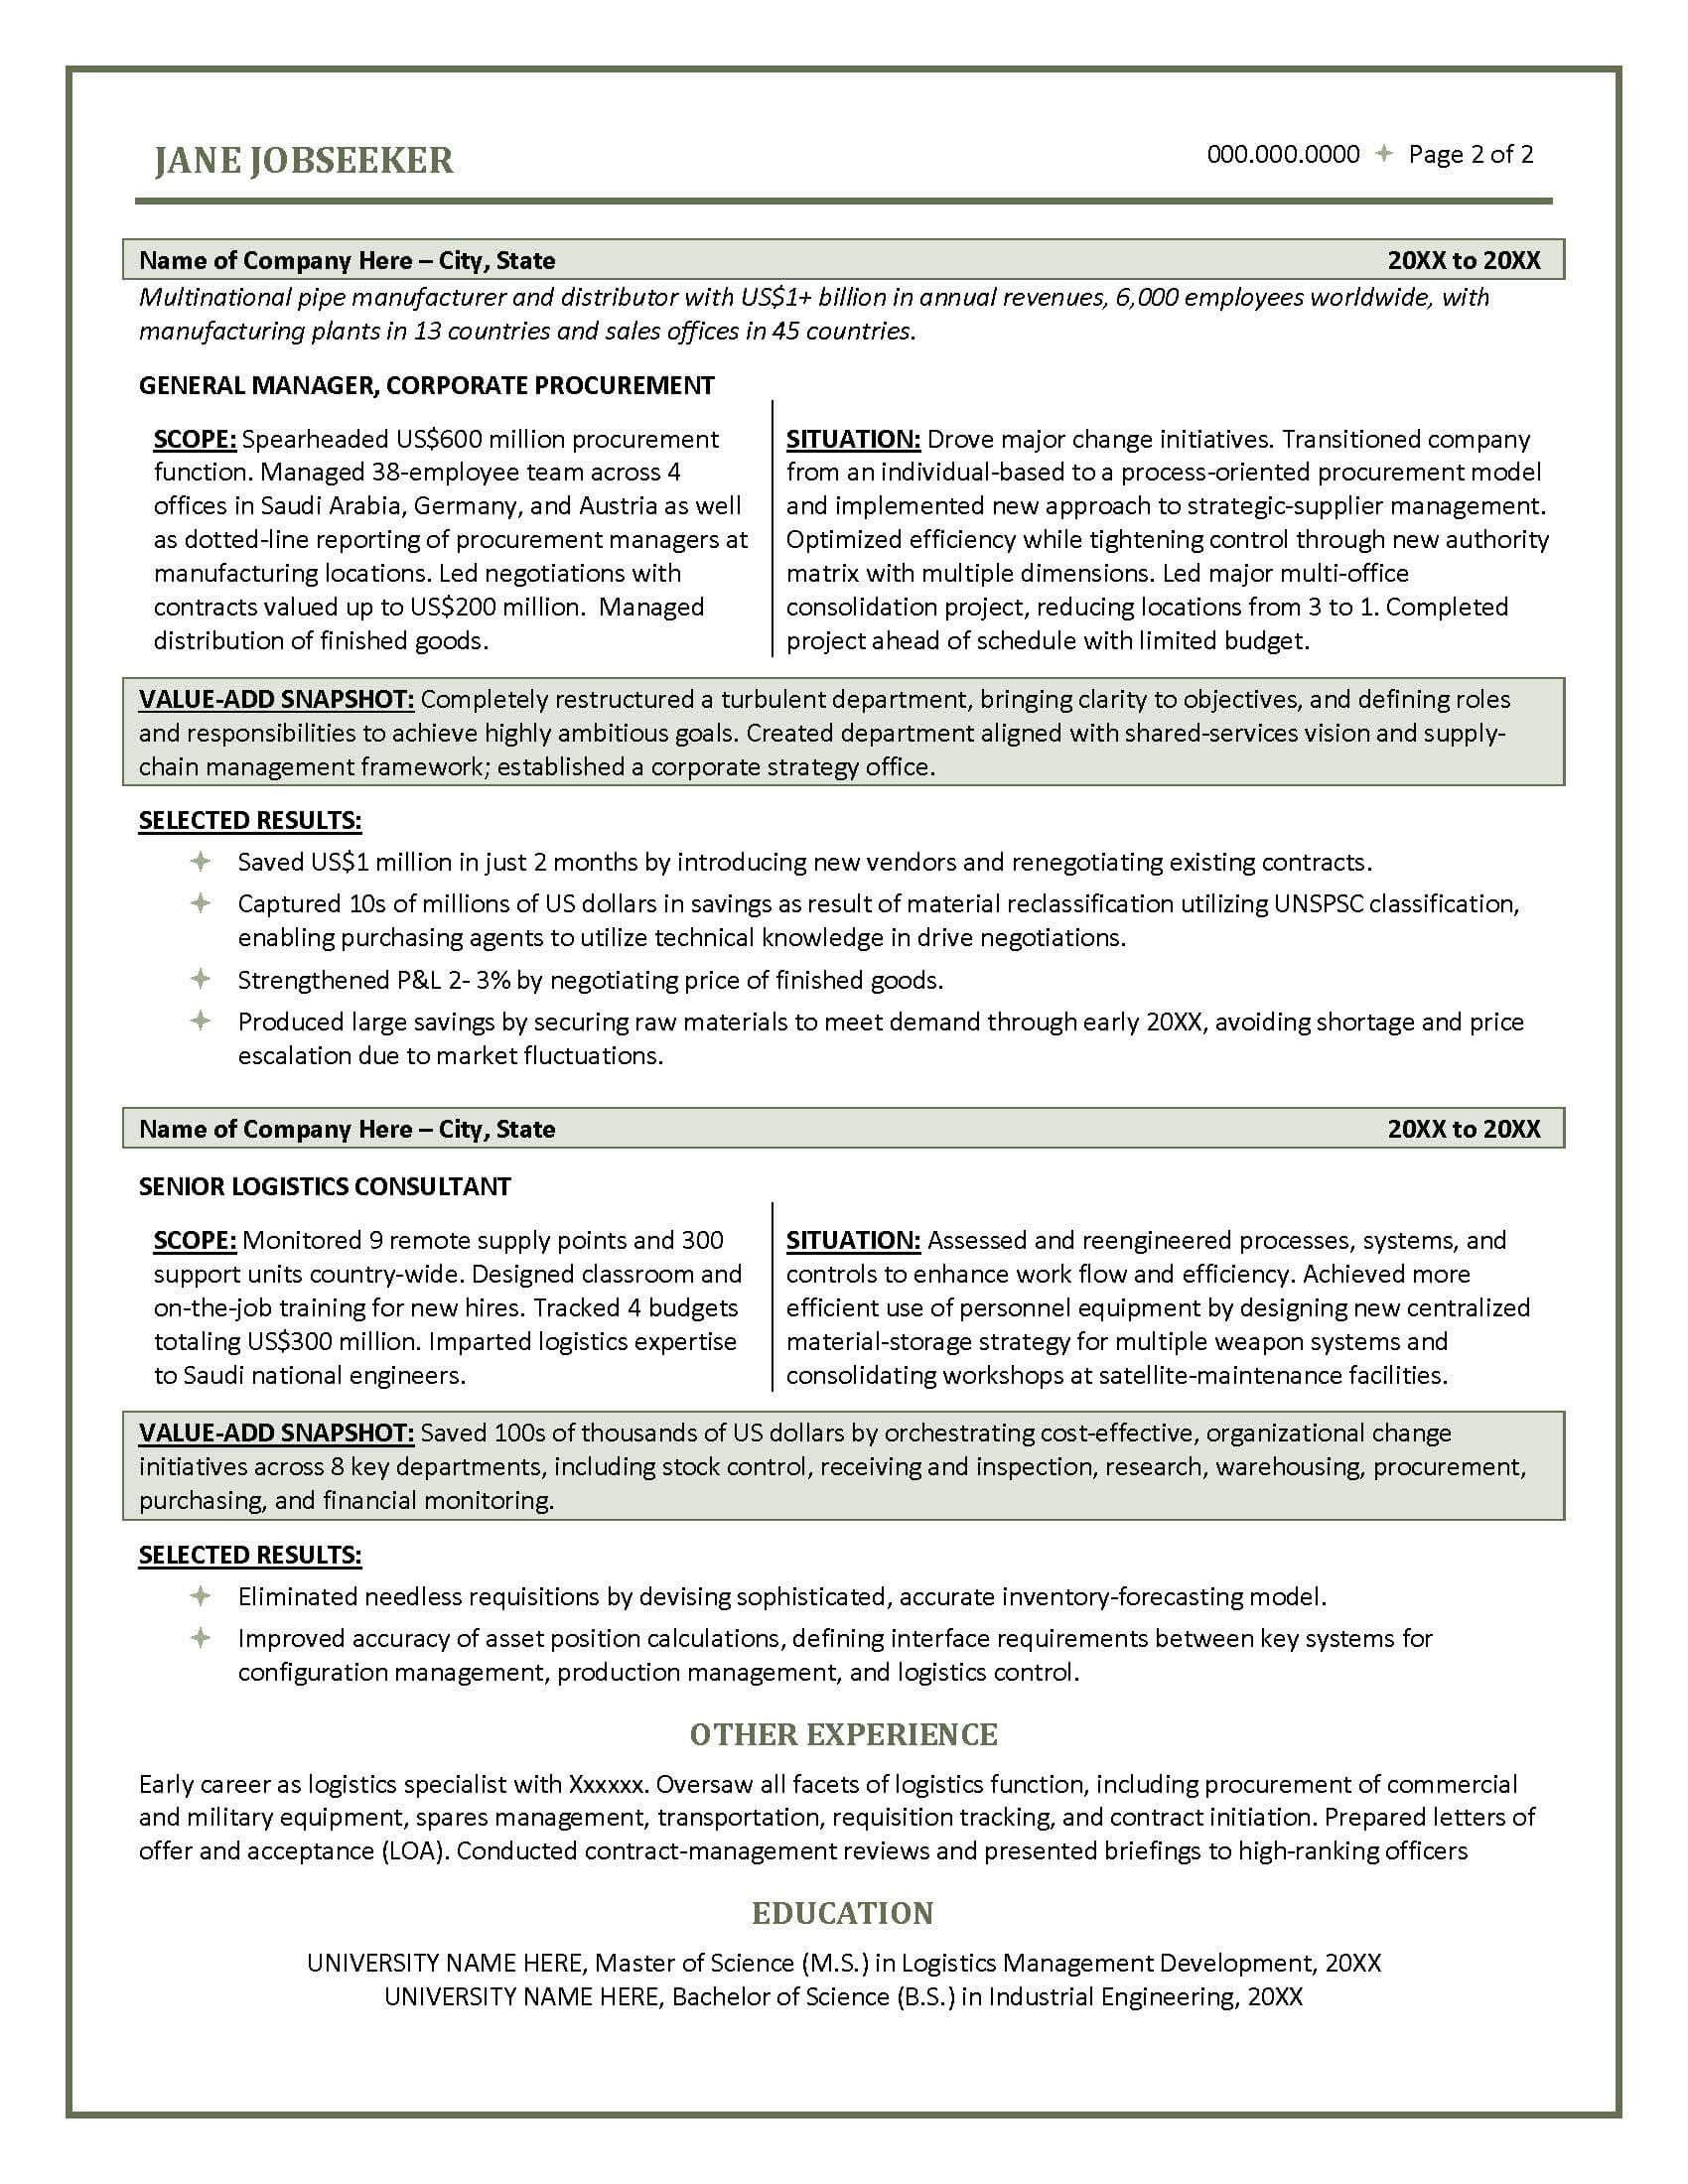 Example Resume with Accomplishment Stories Page 2